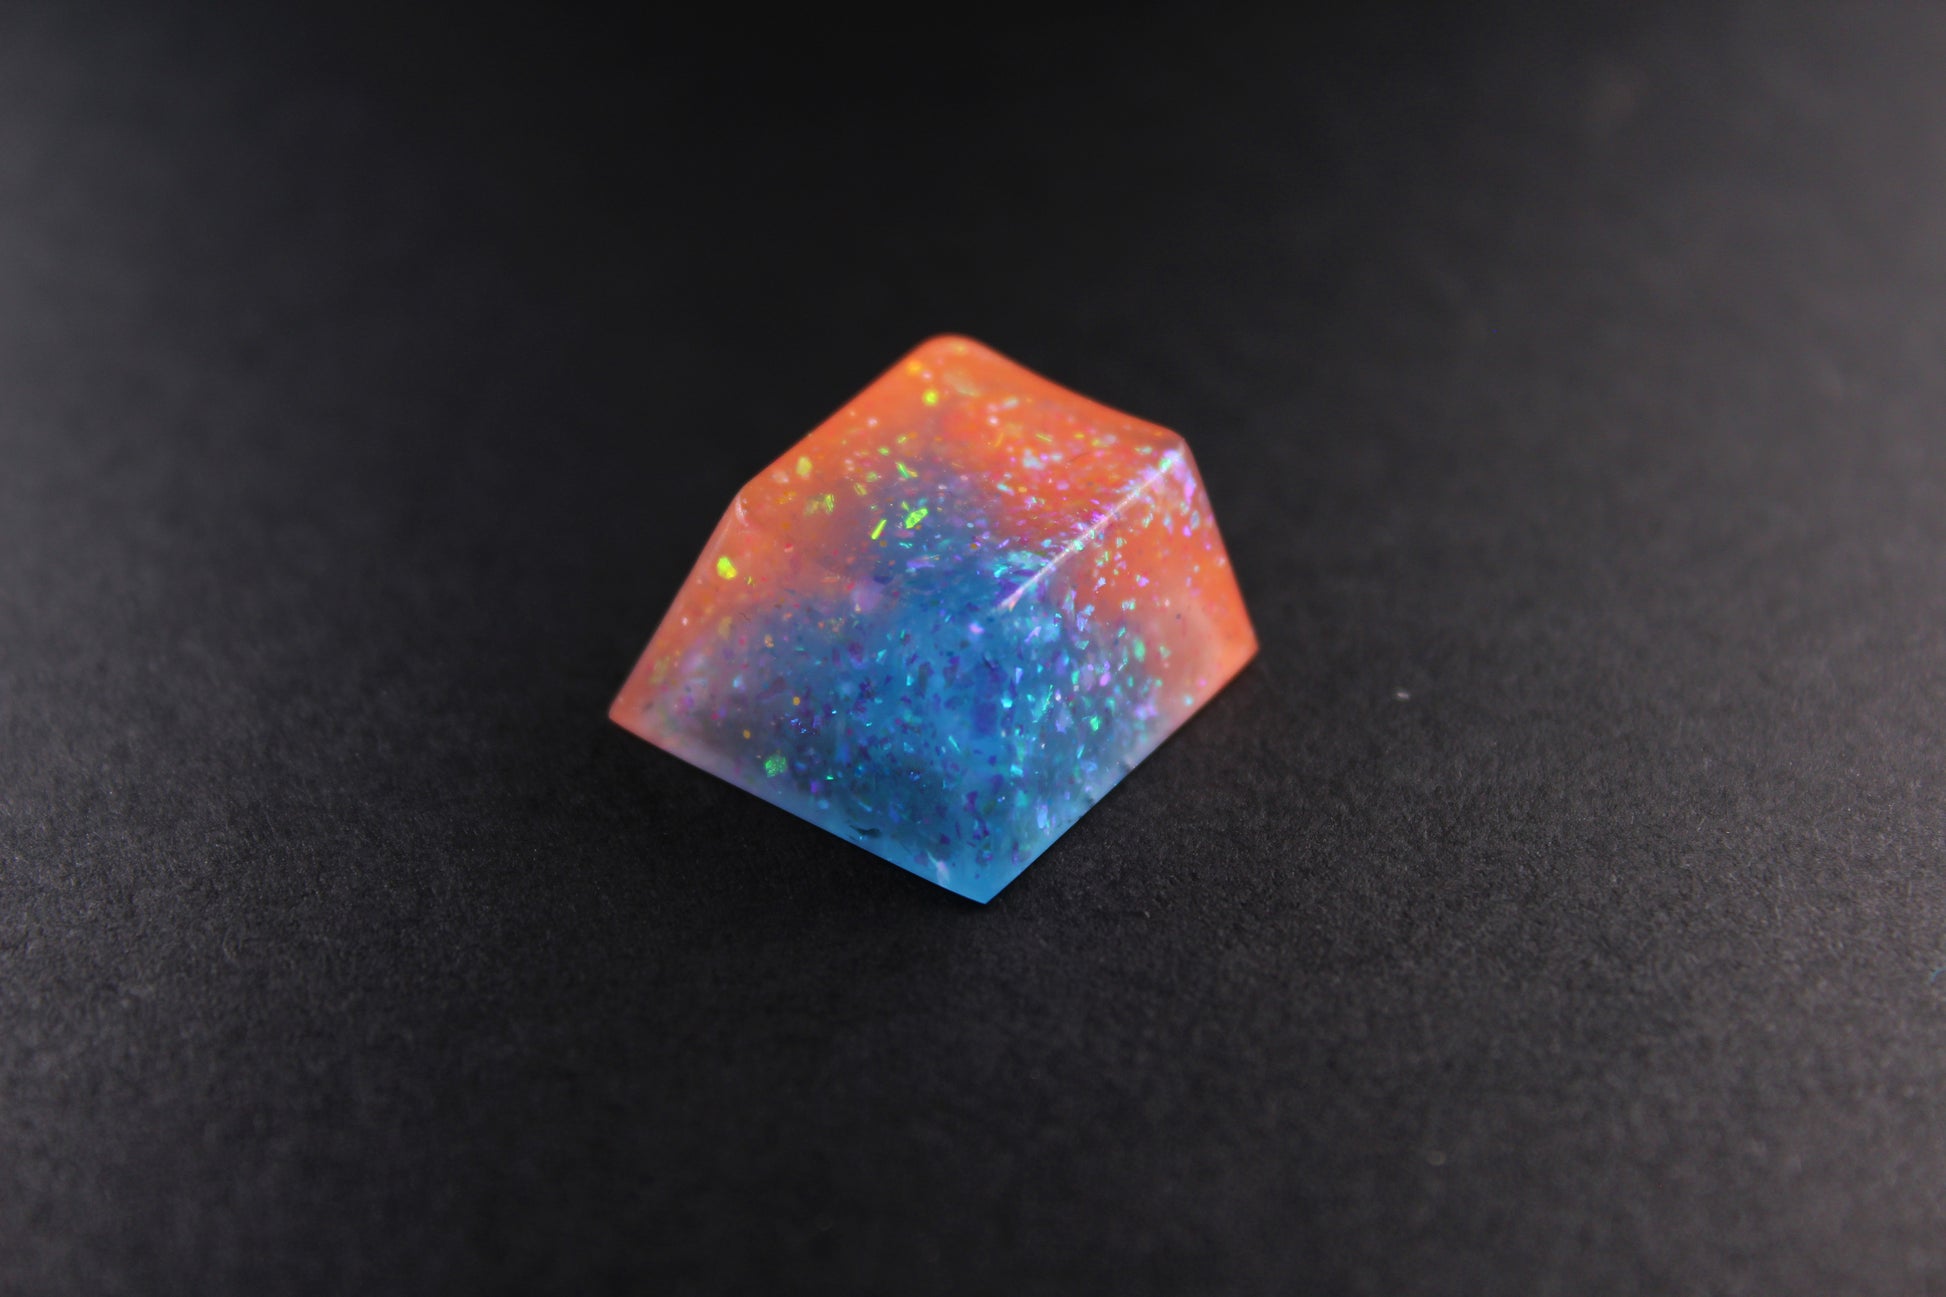 Cherry Esc - Elemental Glow 5 - PrimeCaps Keycap - Blank and Sculpted Artisan Keycaps for cherry MX mechanical keyboards 